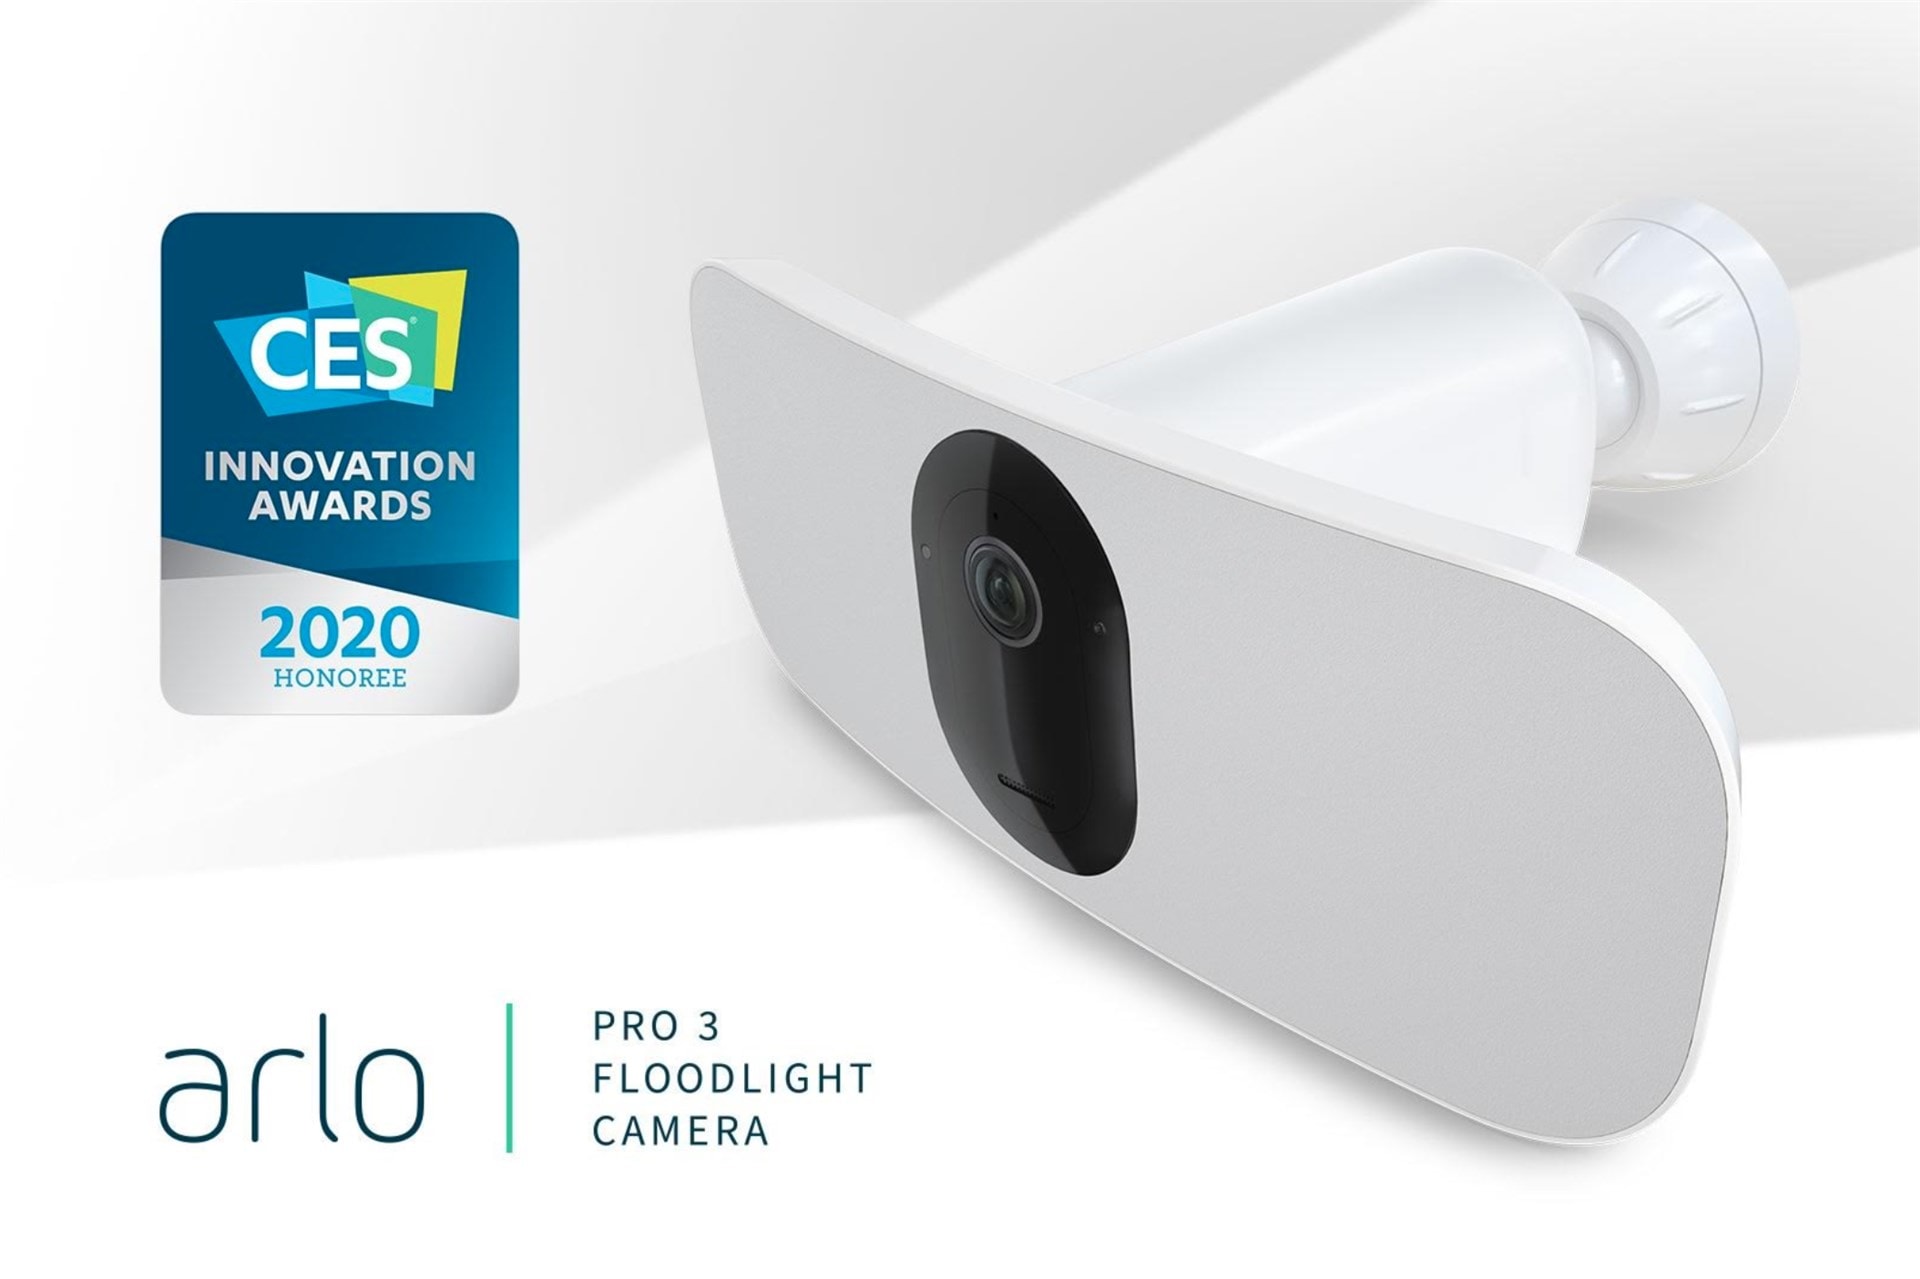 Arlo announces their first floodlight security camera and its wire-free  Arlo Pro 3 Floodlight Camera